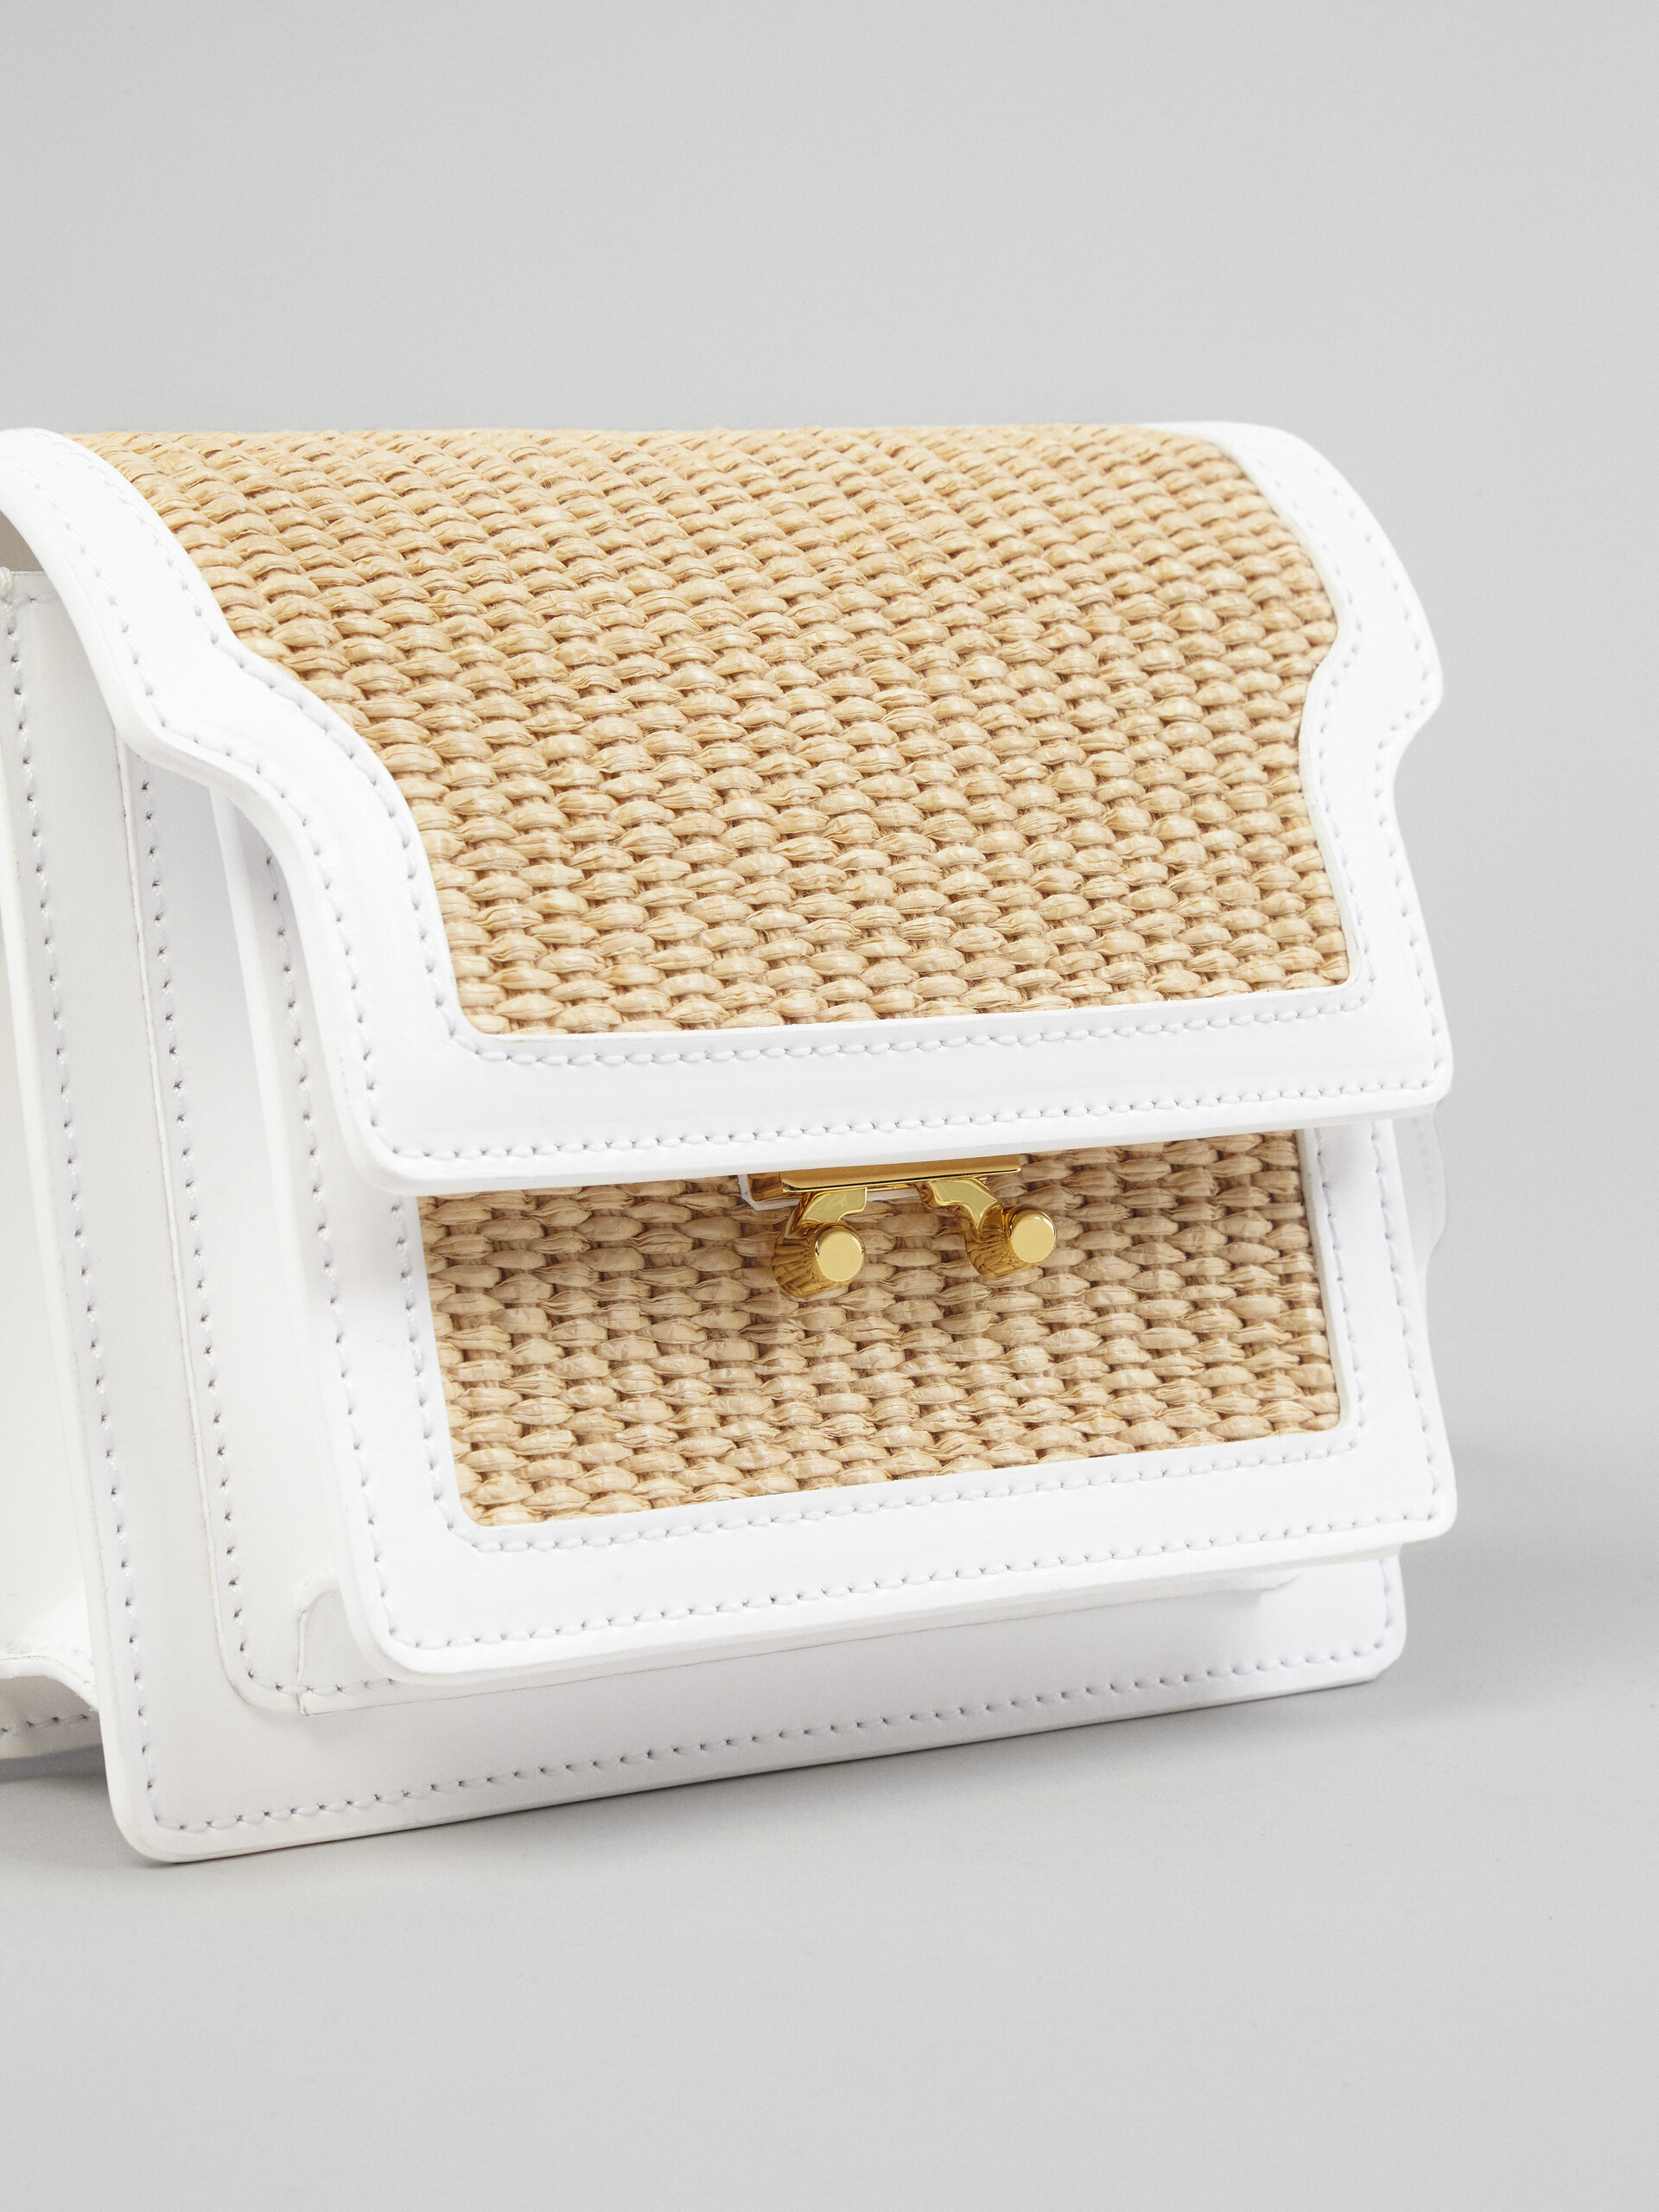 TRUNK SOFT mini bag in white leather and raffia - Shoulder Bags - Image 3